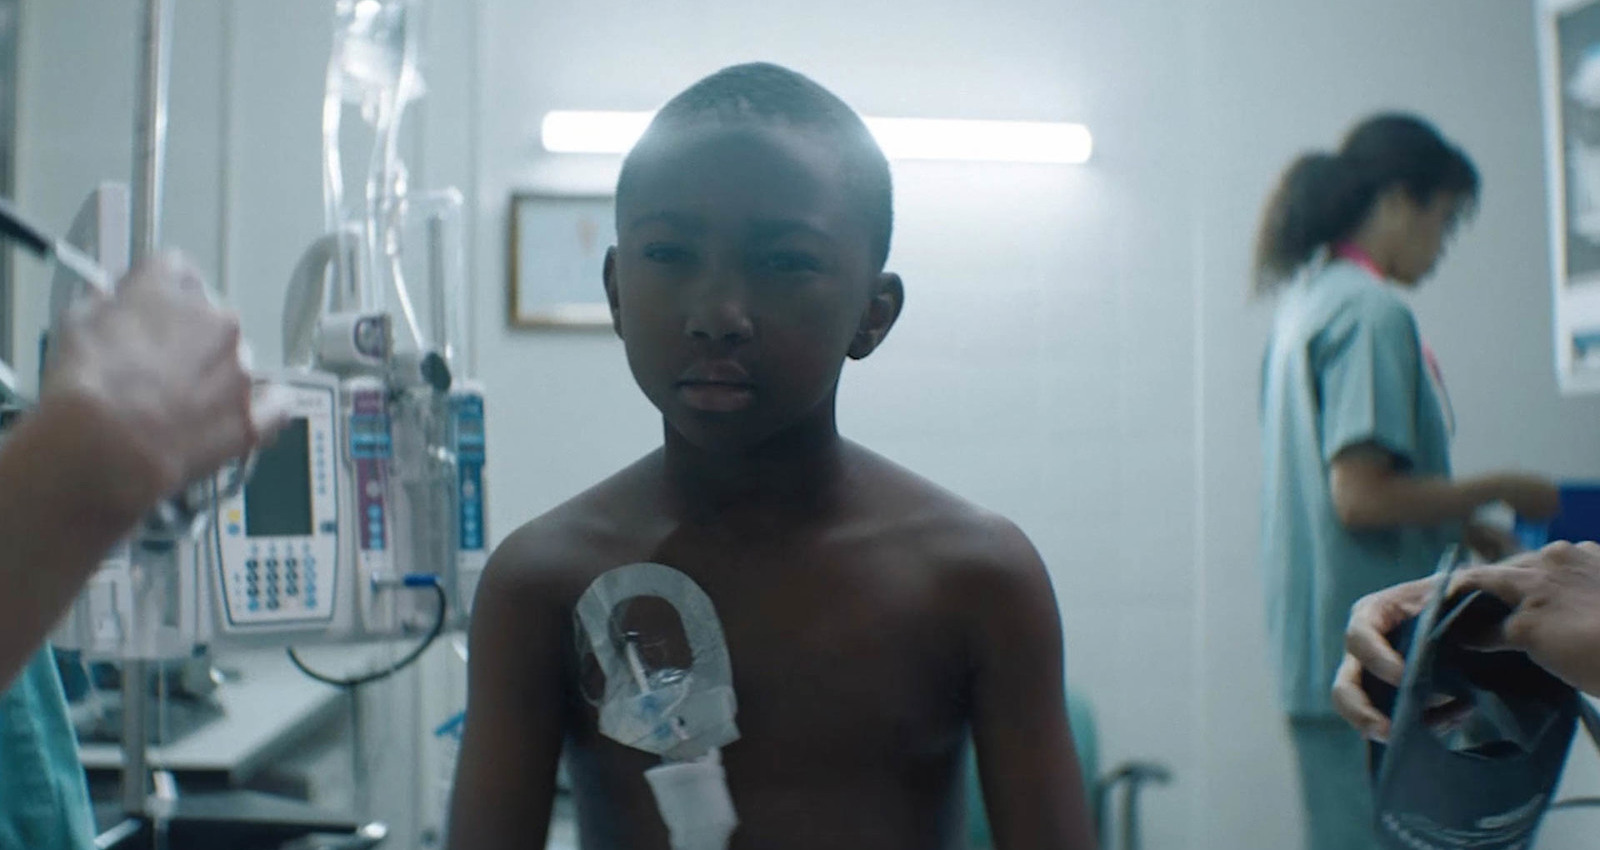 SickKids VS - This Is Why